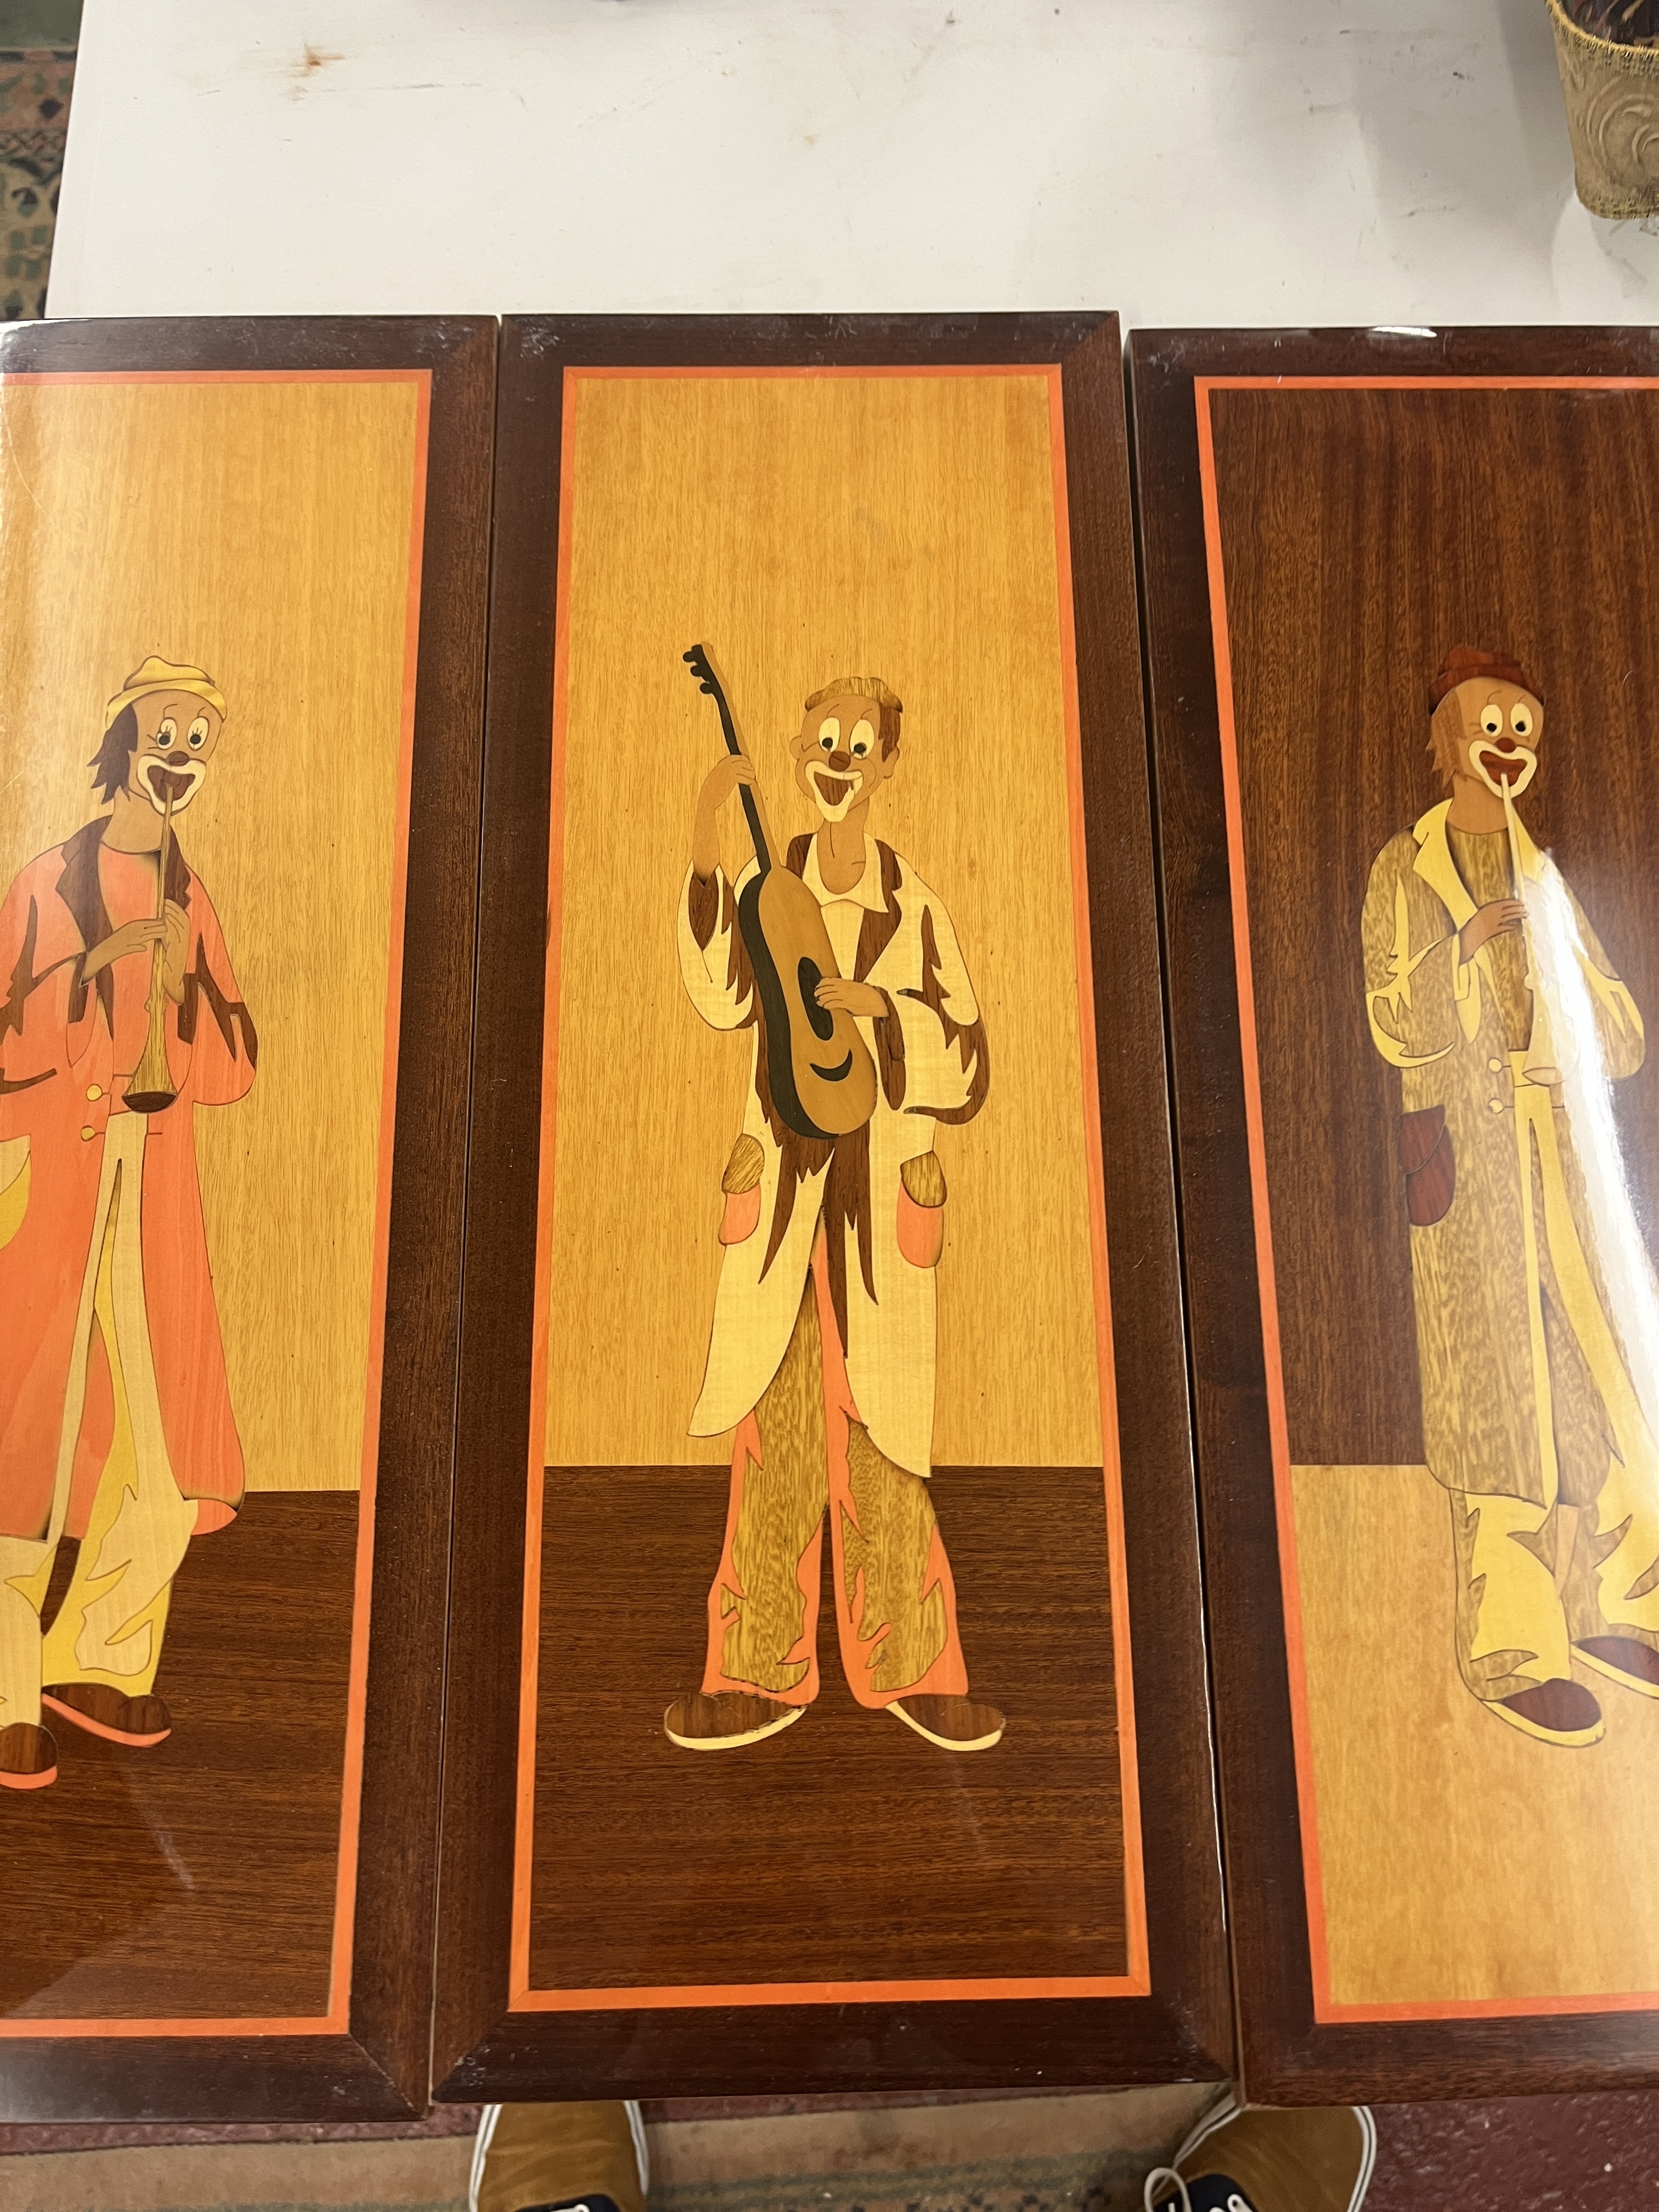 Set of 6 Italian marquetry wooden pictures of clowns - Image 6 of 7